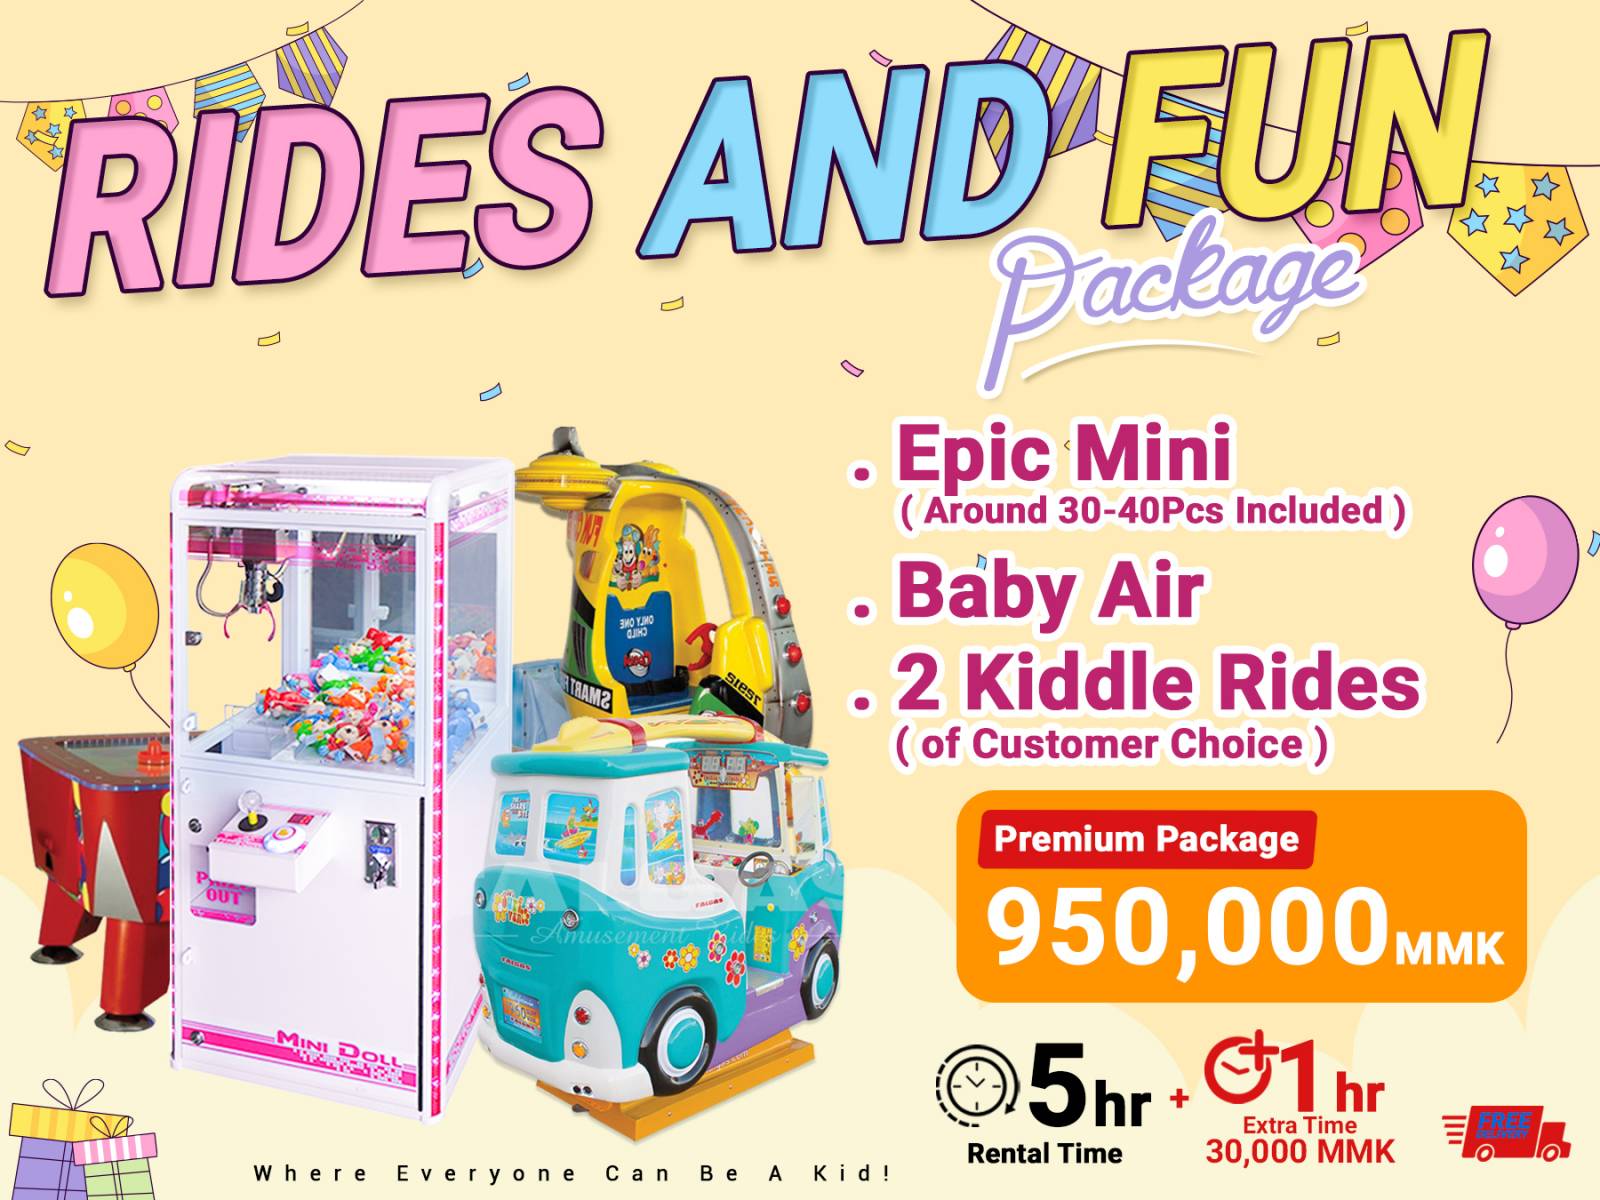 Rides and Fun Package (Premium)